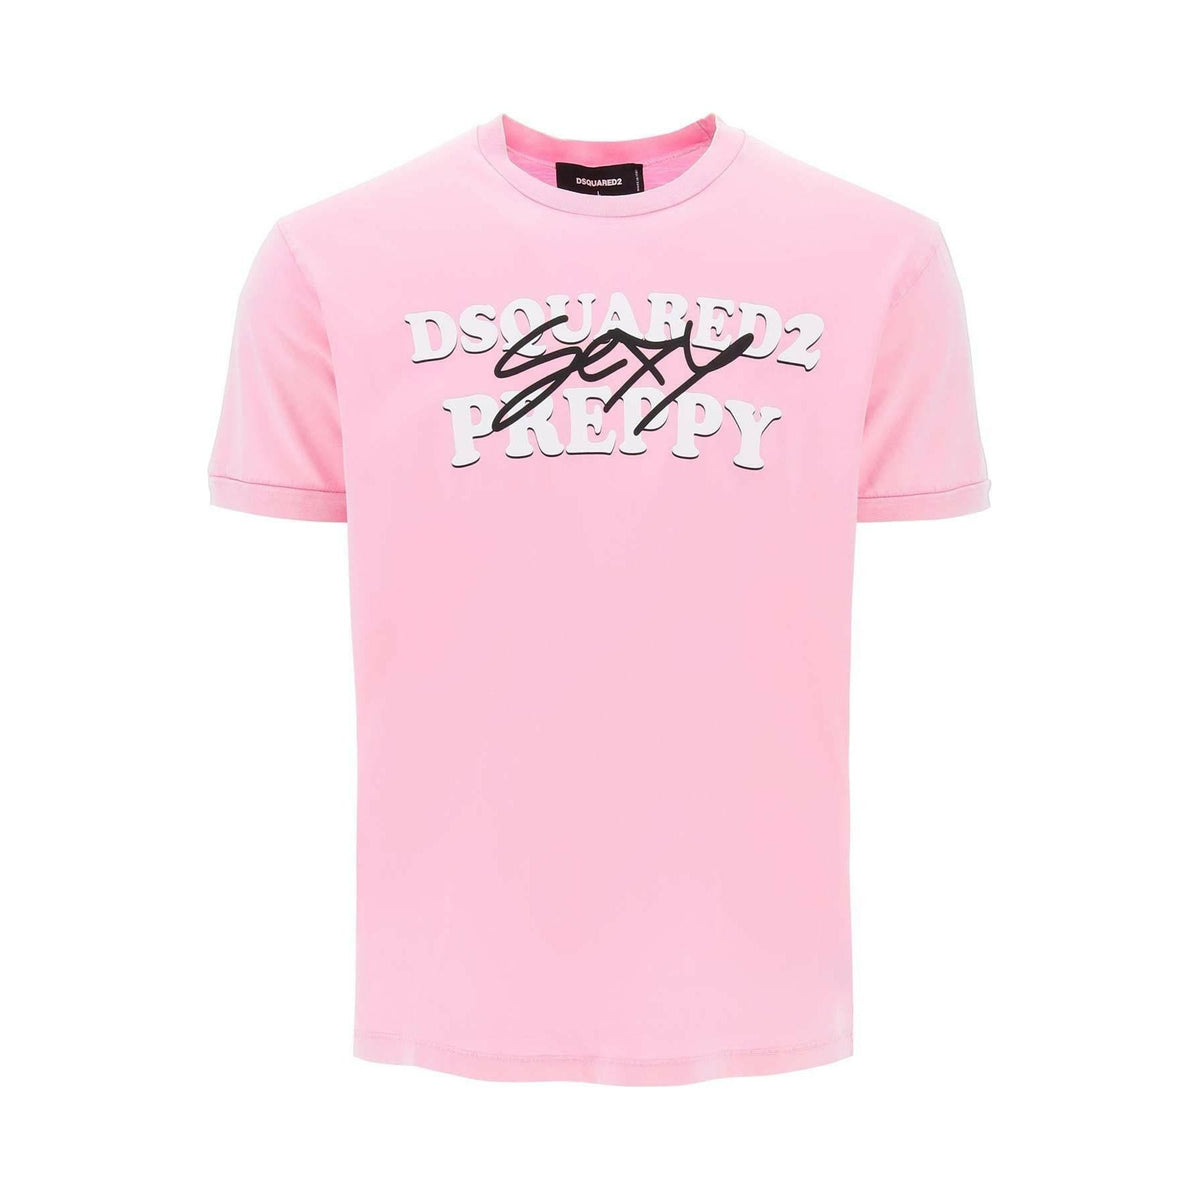 DSQUARED2 - Pink Sexy Preppy Muscle Fit Cotton T-Shirt - JOHN JULIA